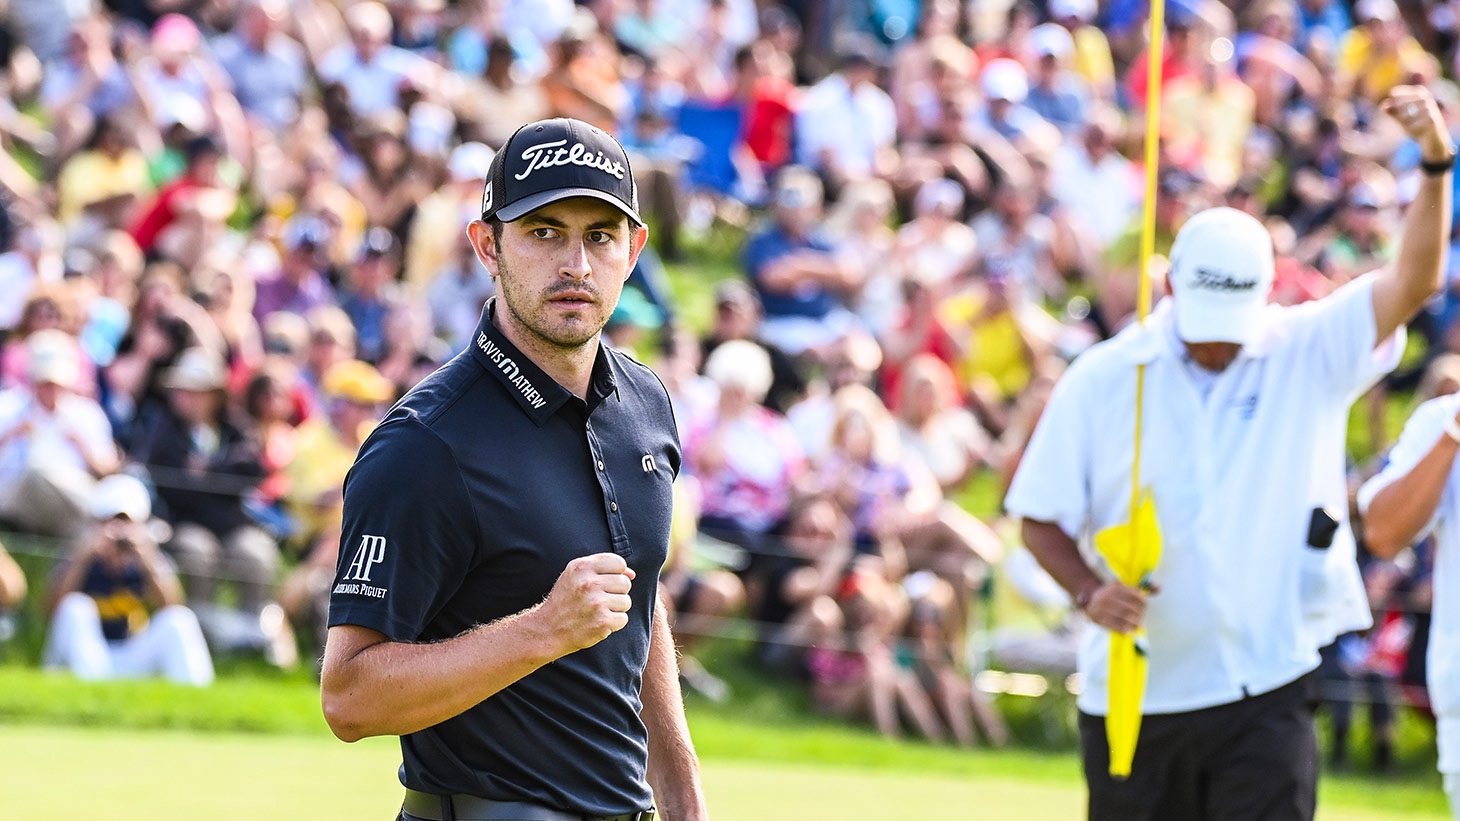 Patrick Cantlay reacts after holng the winning putt with his Pro V1 golf ball at the 2019 Memorial Tournament